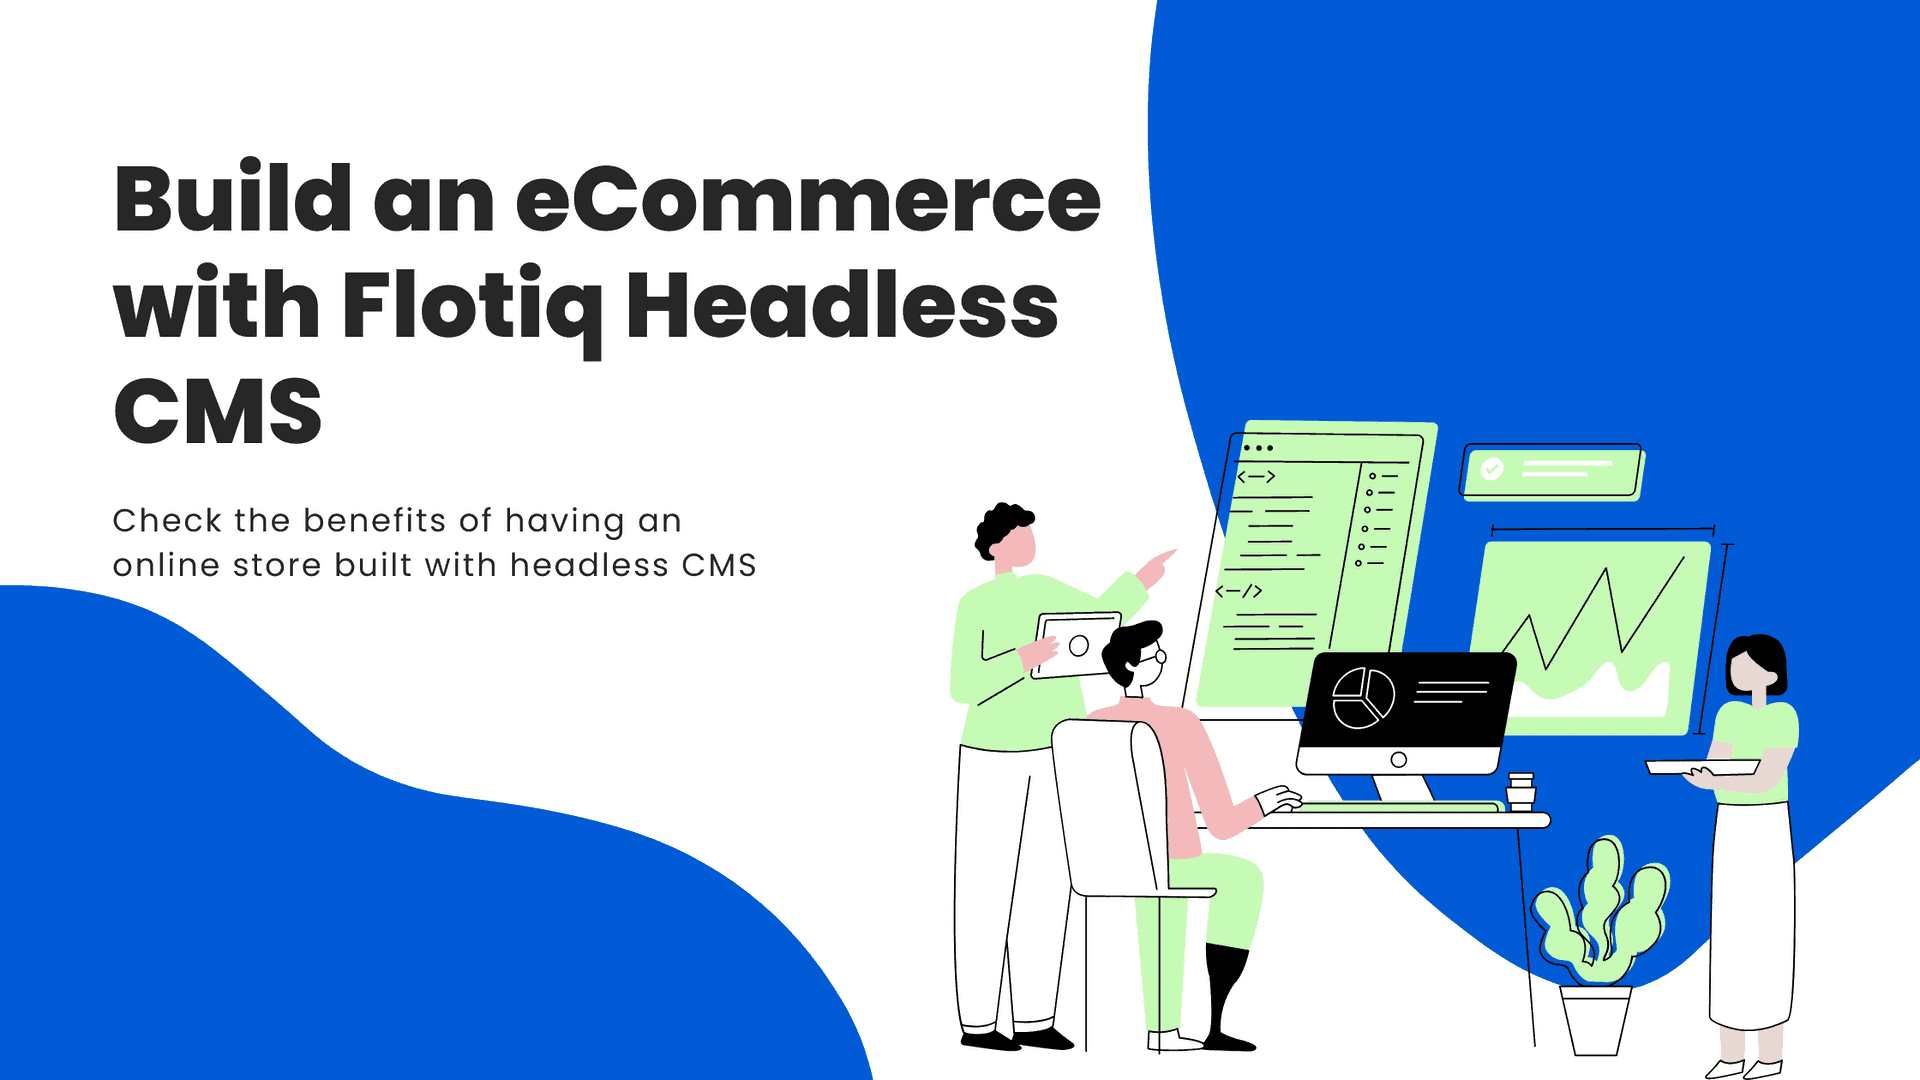 Why build an ecommerce store with Flotiq Headless CMS